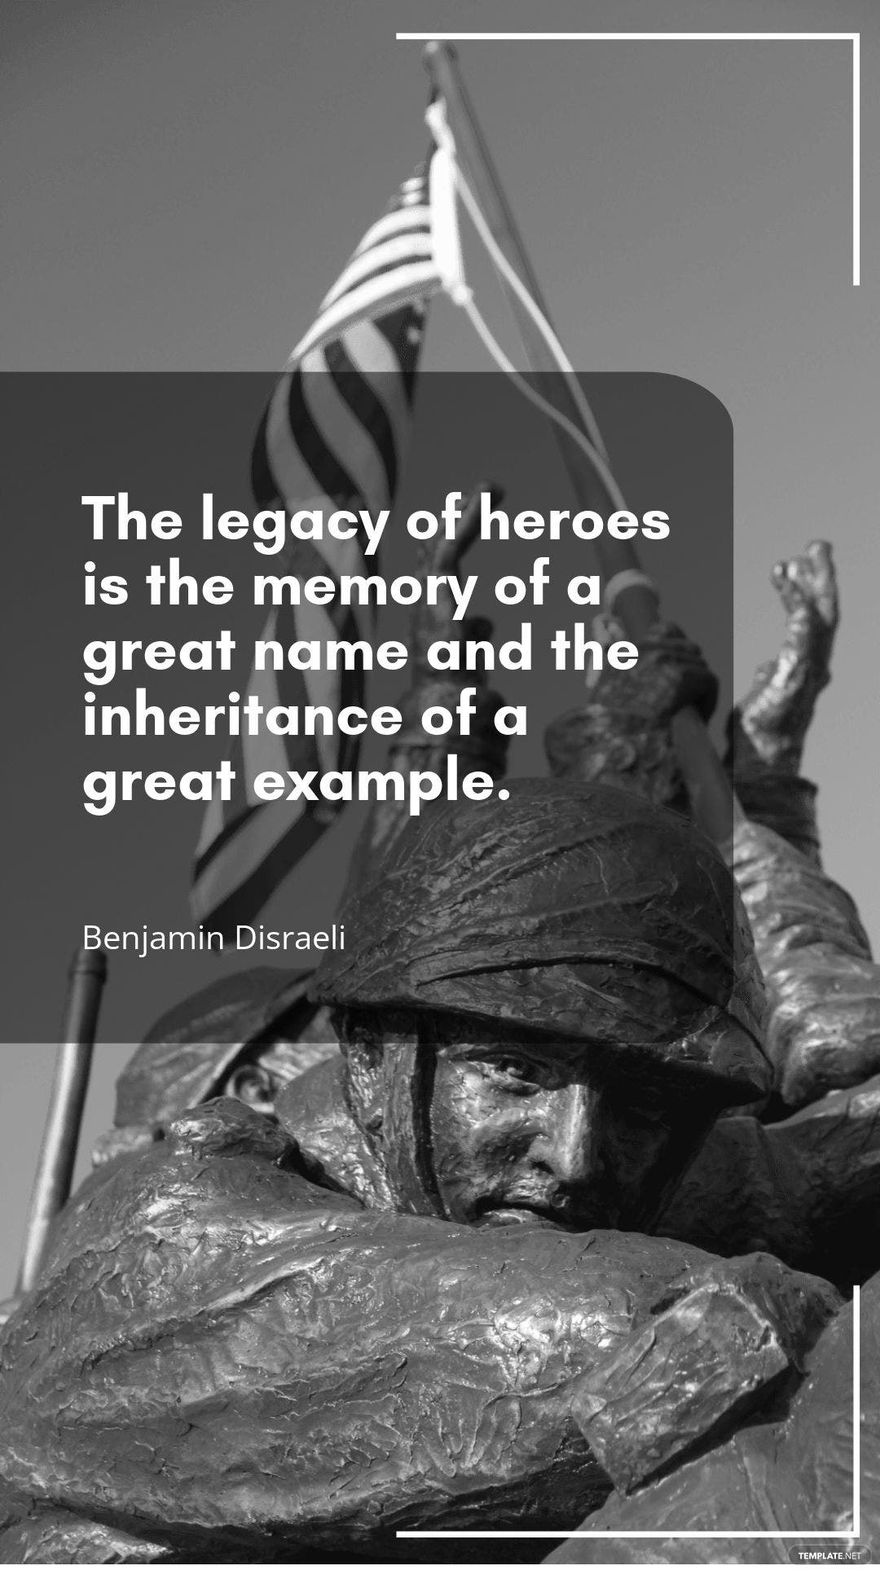 Free Benjamin Disraeli - The legacy of heroes is the memory of a great name and the inheritance of a great example. in JPG